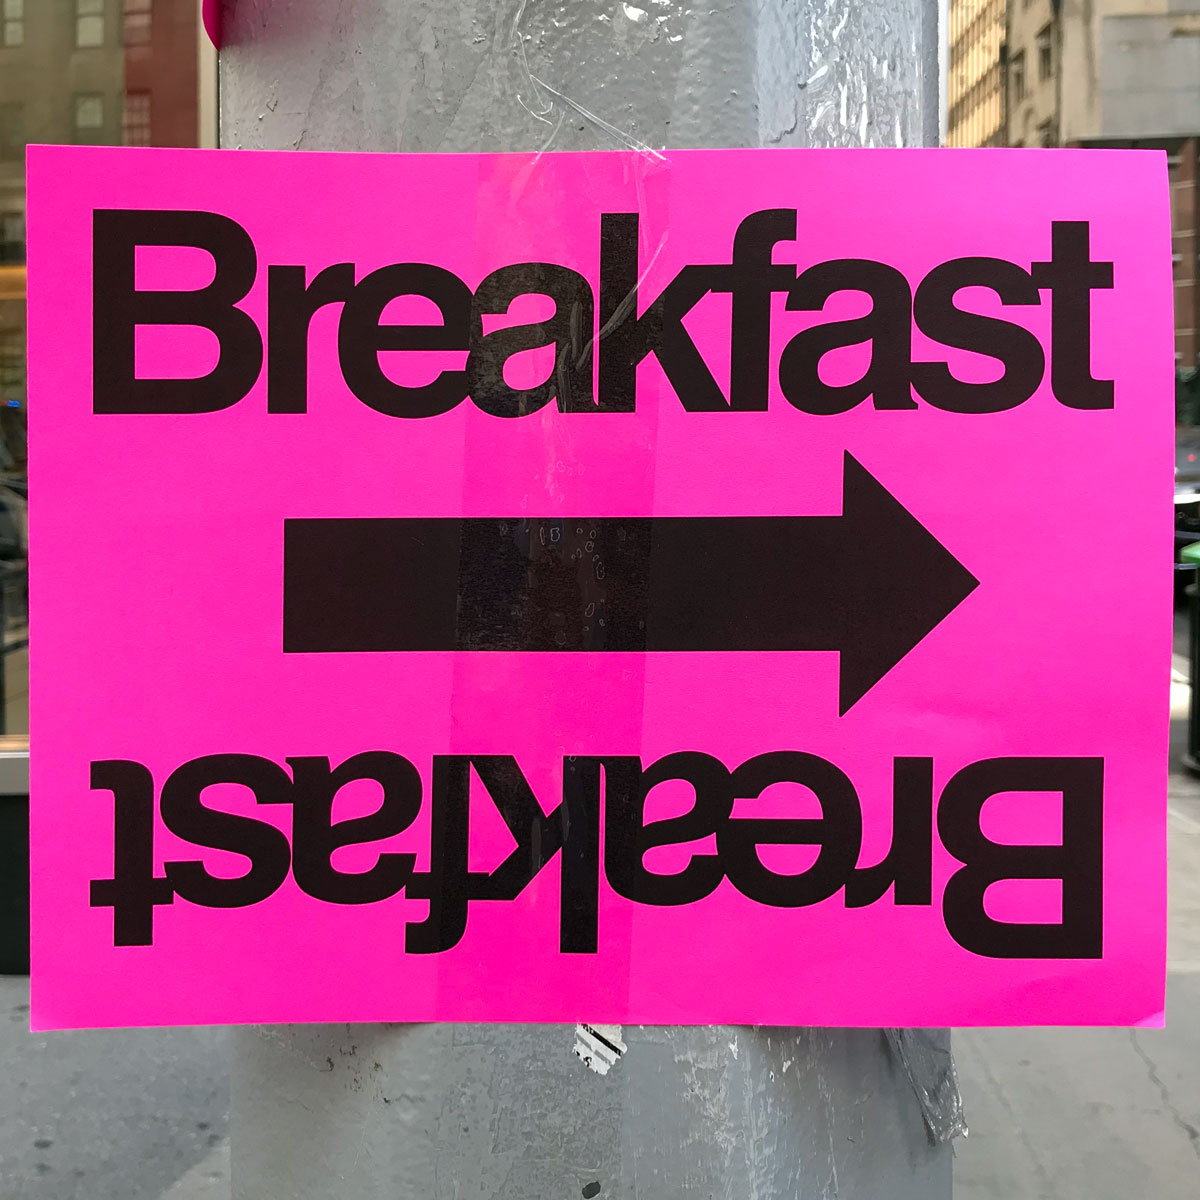 Breakfast sign with an arrow facing right where ‘breakfast’ is written across the top and bottom but flipped over on the bottom so that if the sign were turned 180 degrees it would still be readable